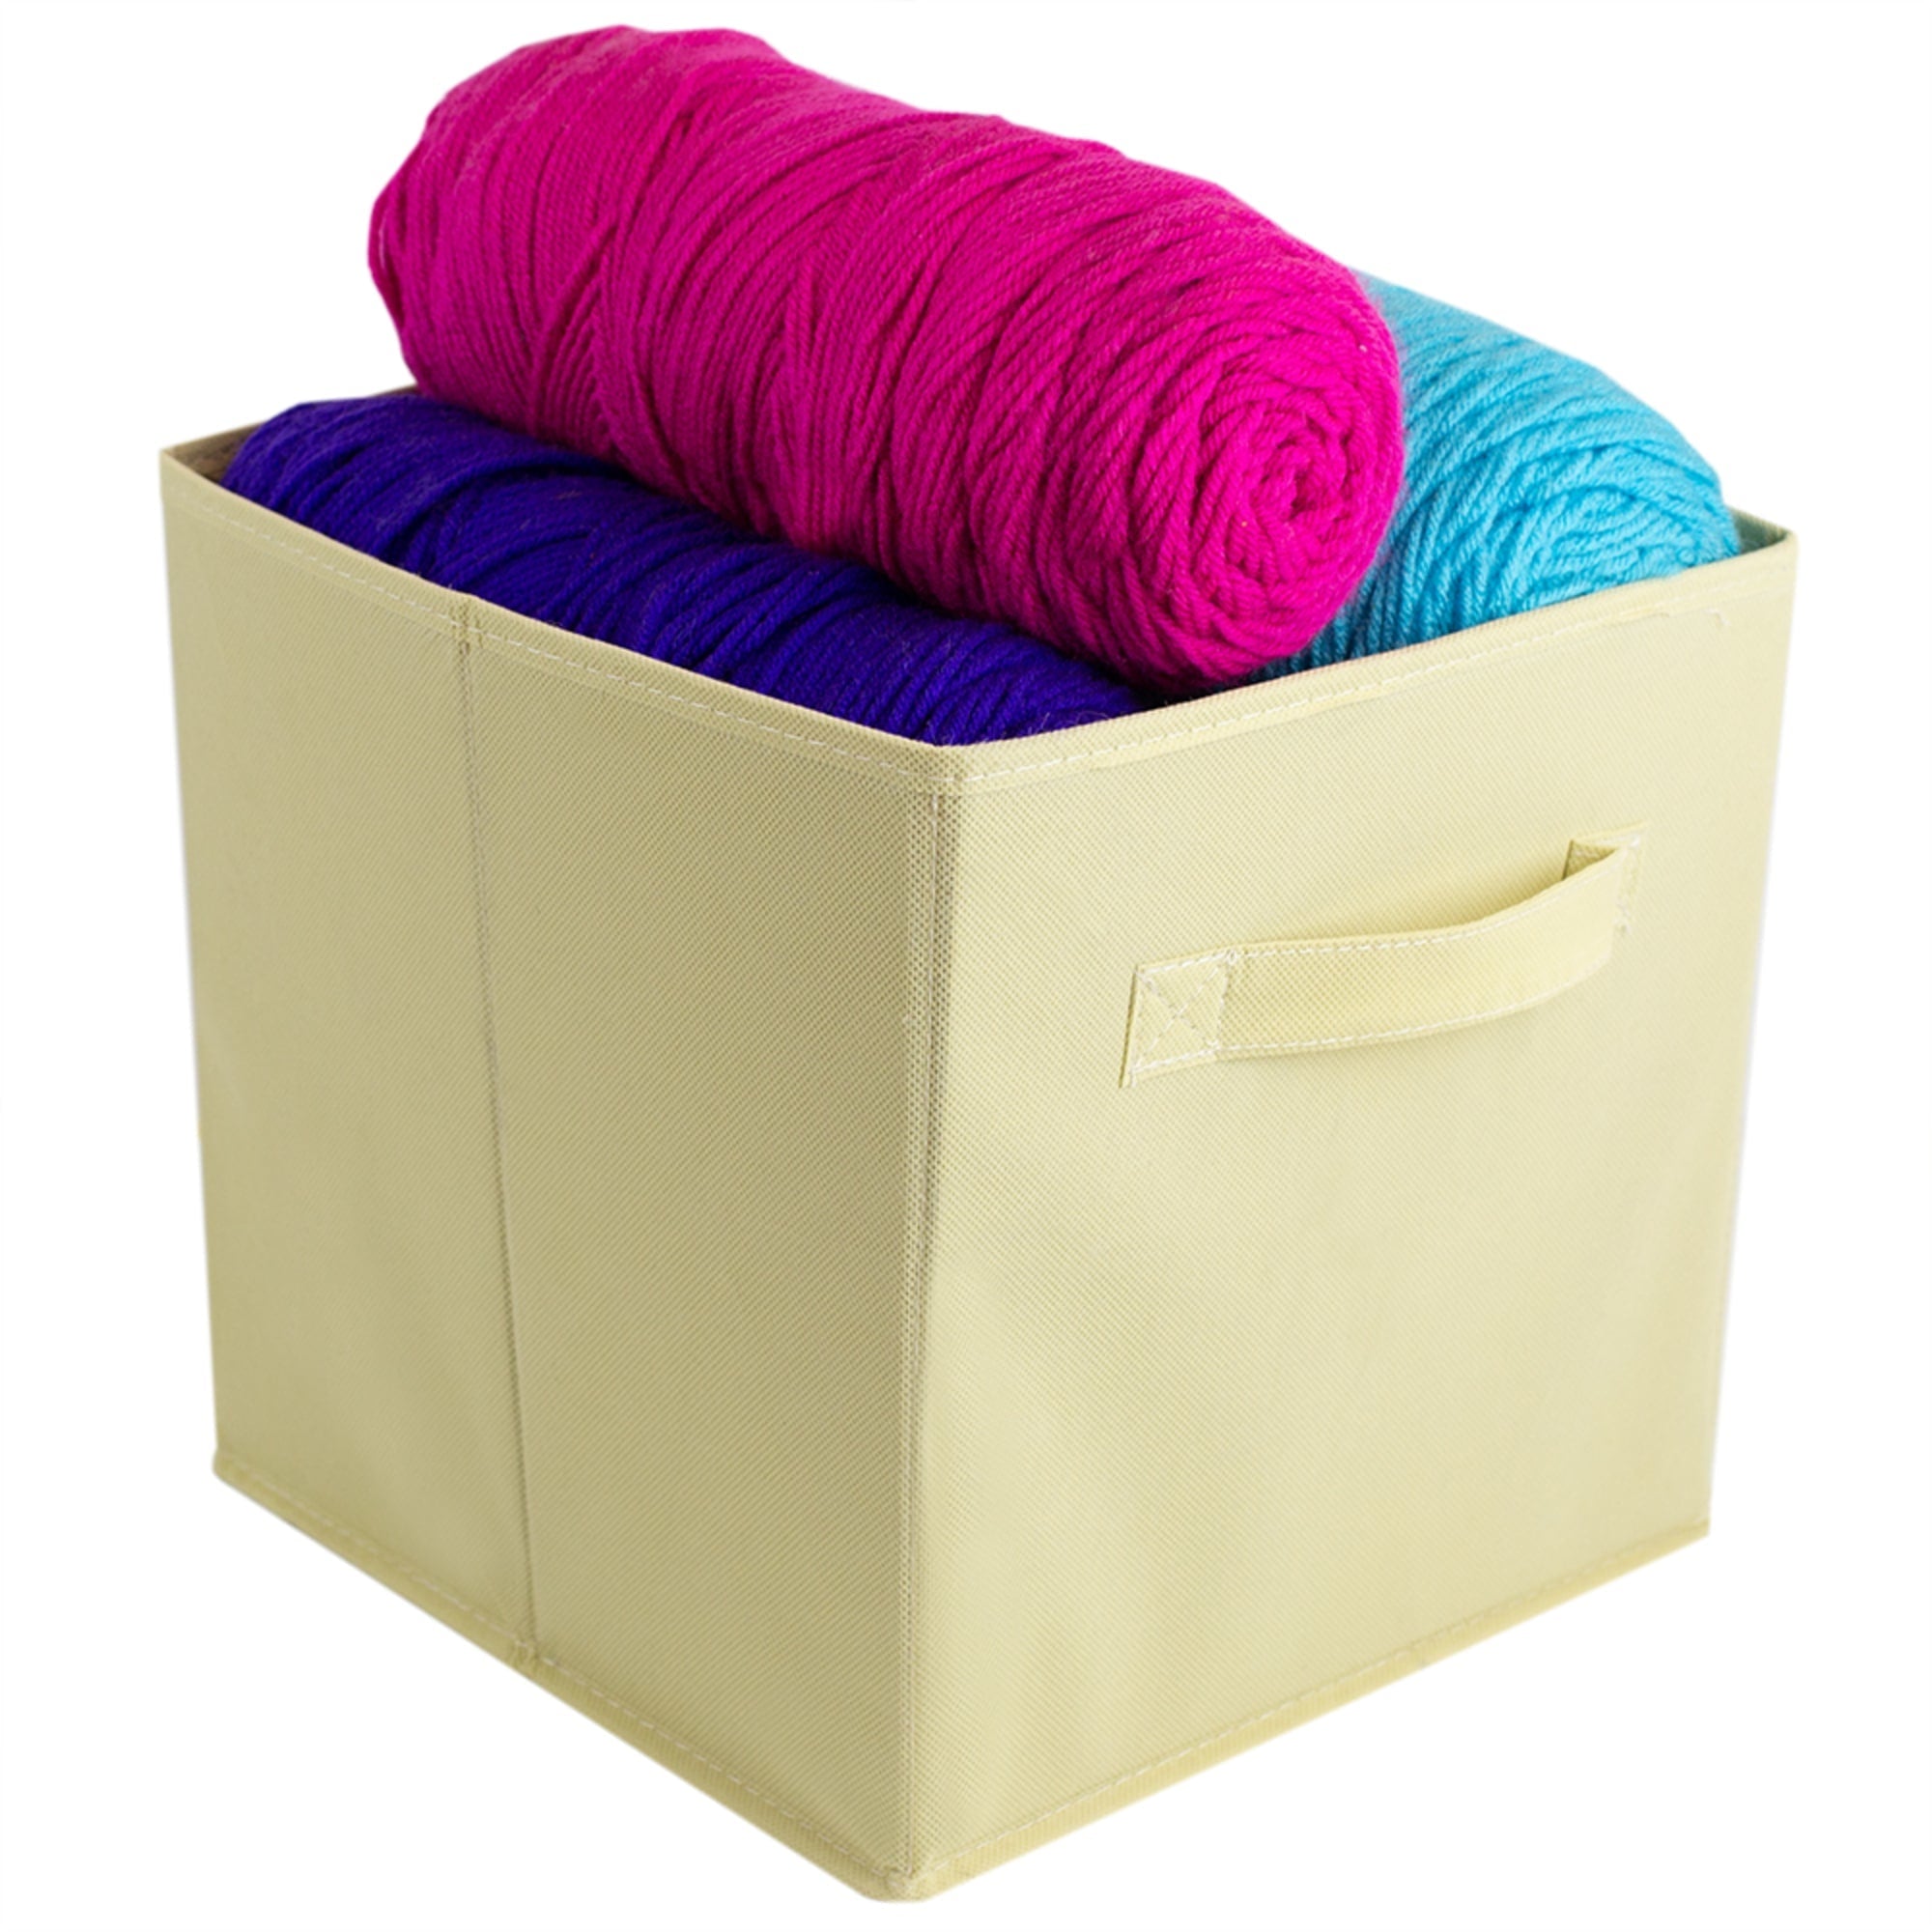 Home Basics Collapsible and Foldable Non-Woven Storage Cube, Khaki $3.00 EACH, CASE PACK OF 12